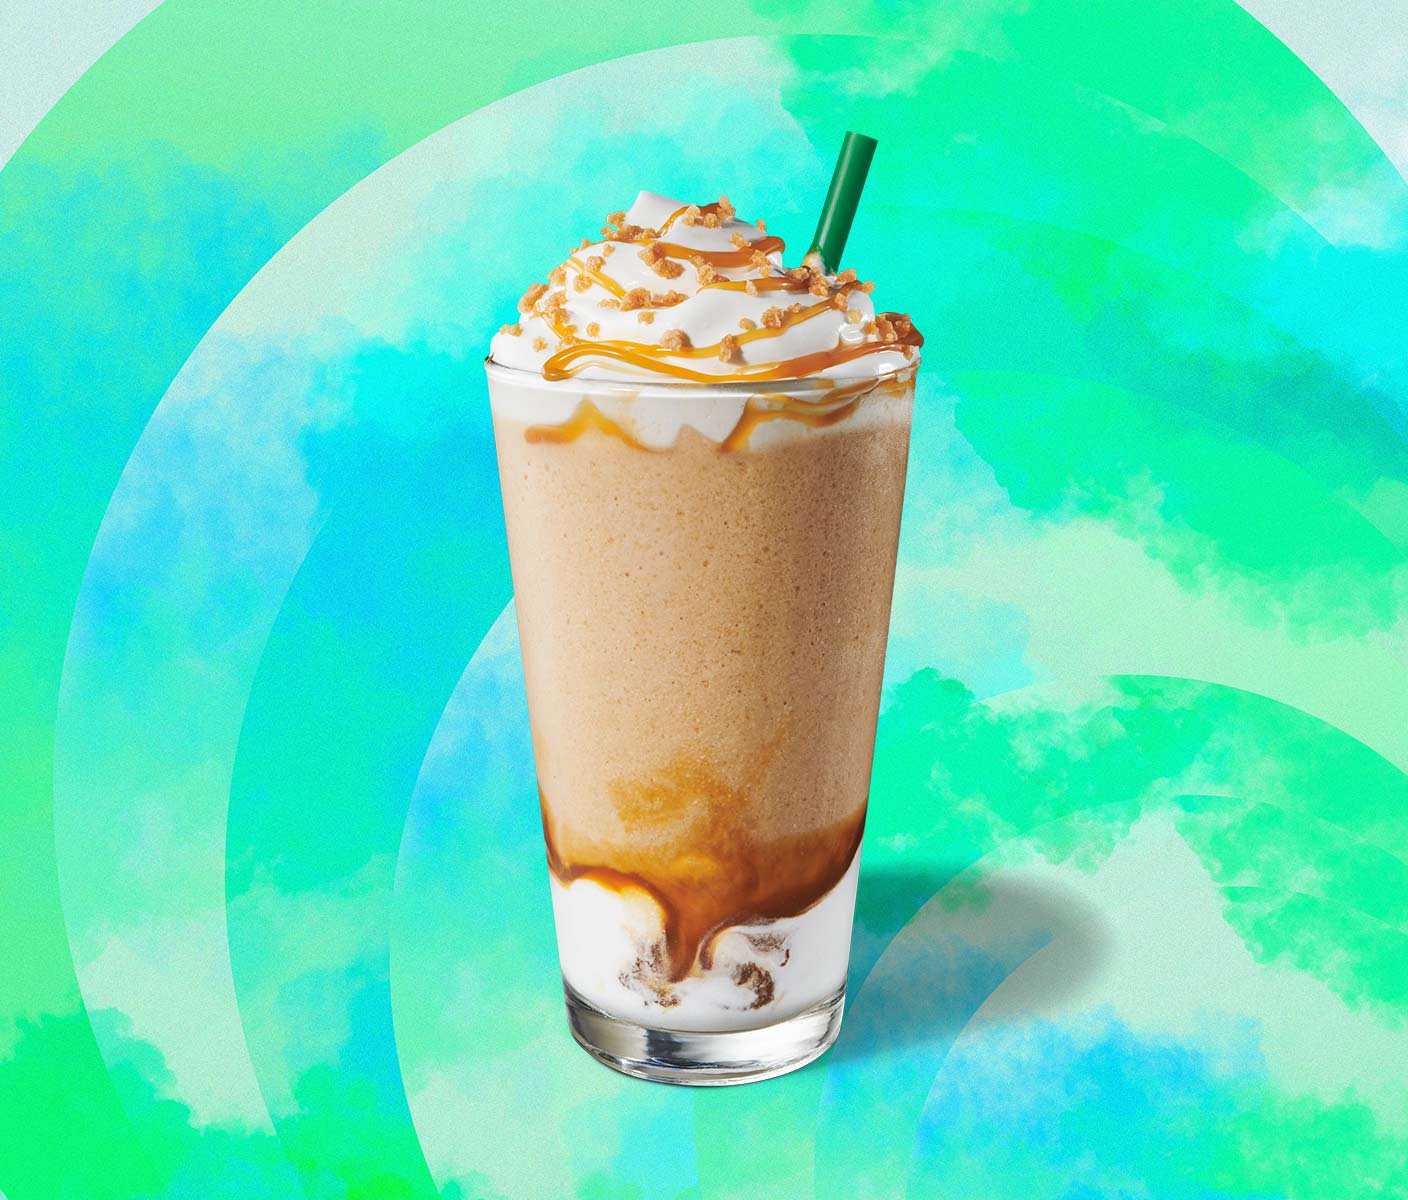 Blended coffee drink with caramel drizzle in a tall glass.